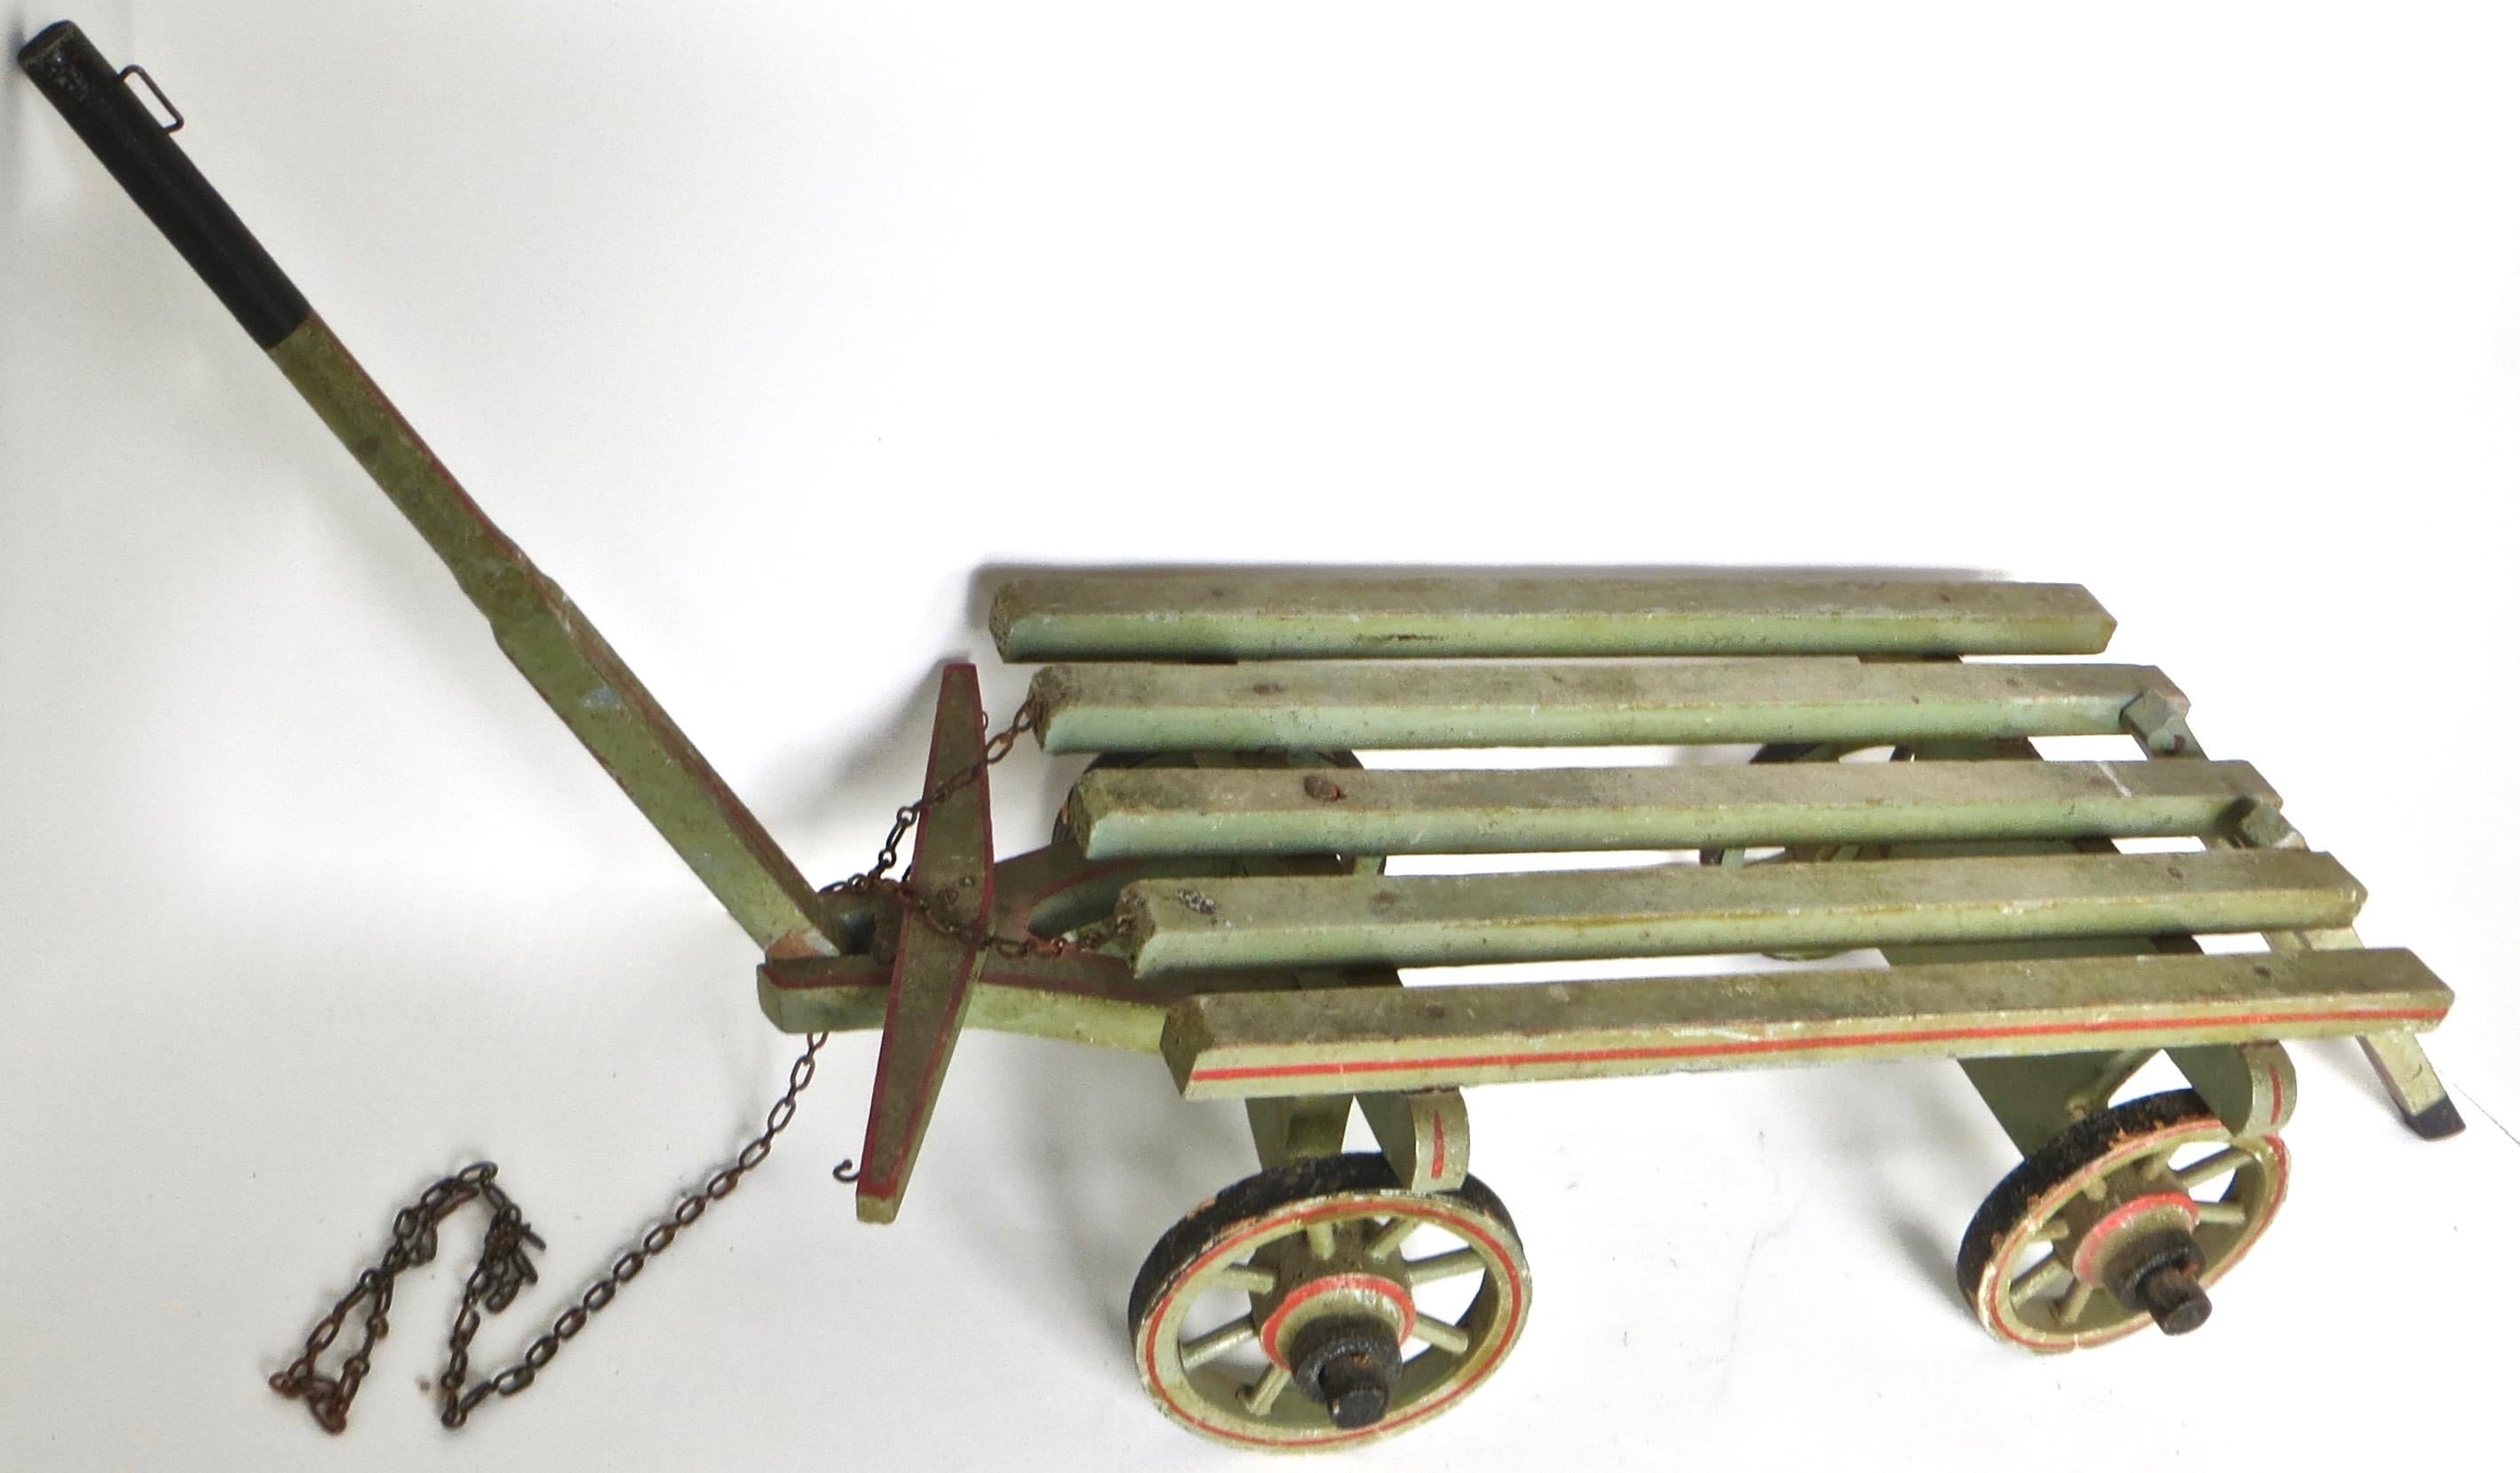 Salesman Sample : Late 19th century. American (4) wheeled hand carved all wooden horse drawn flat bed cargo wagon, in excellent condition with original red stenciling to the wheels, the chassis, the sides of the bed, and the rear ladder. Black